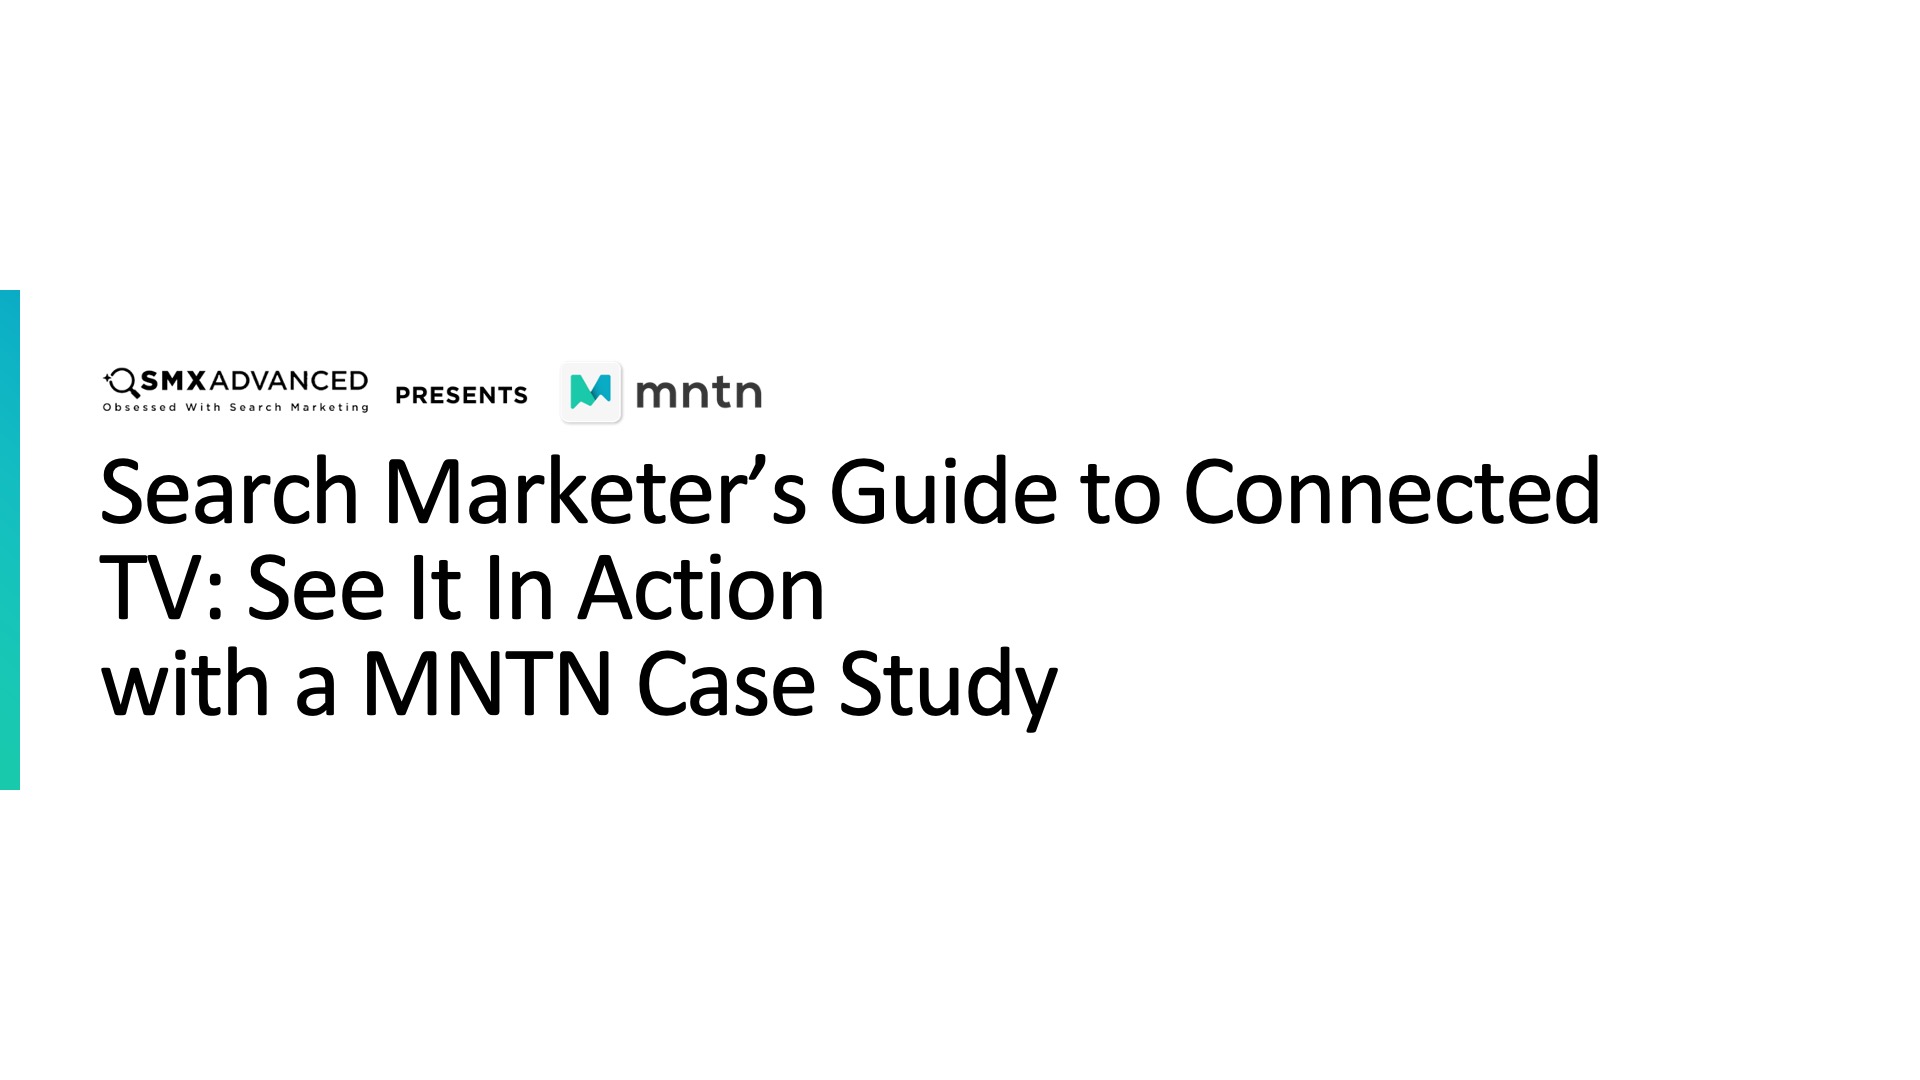 Search Marketer’s Guide to Connected TV: See It In Action with a MNTN Case Study